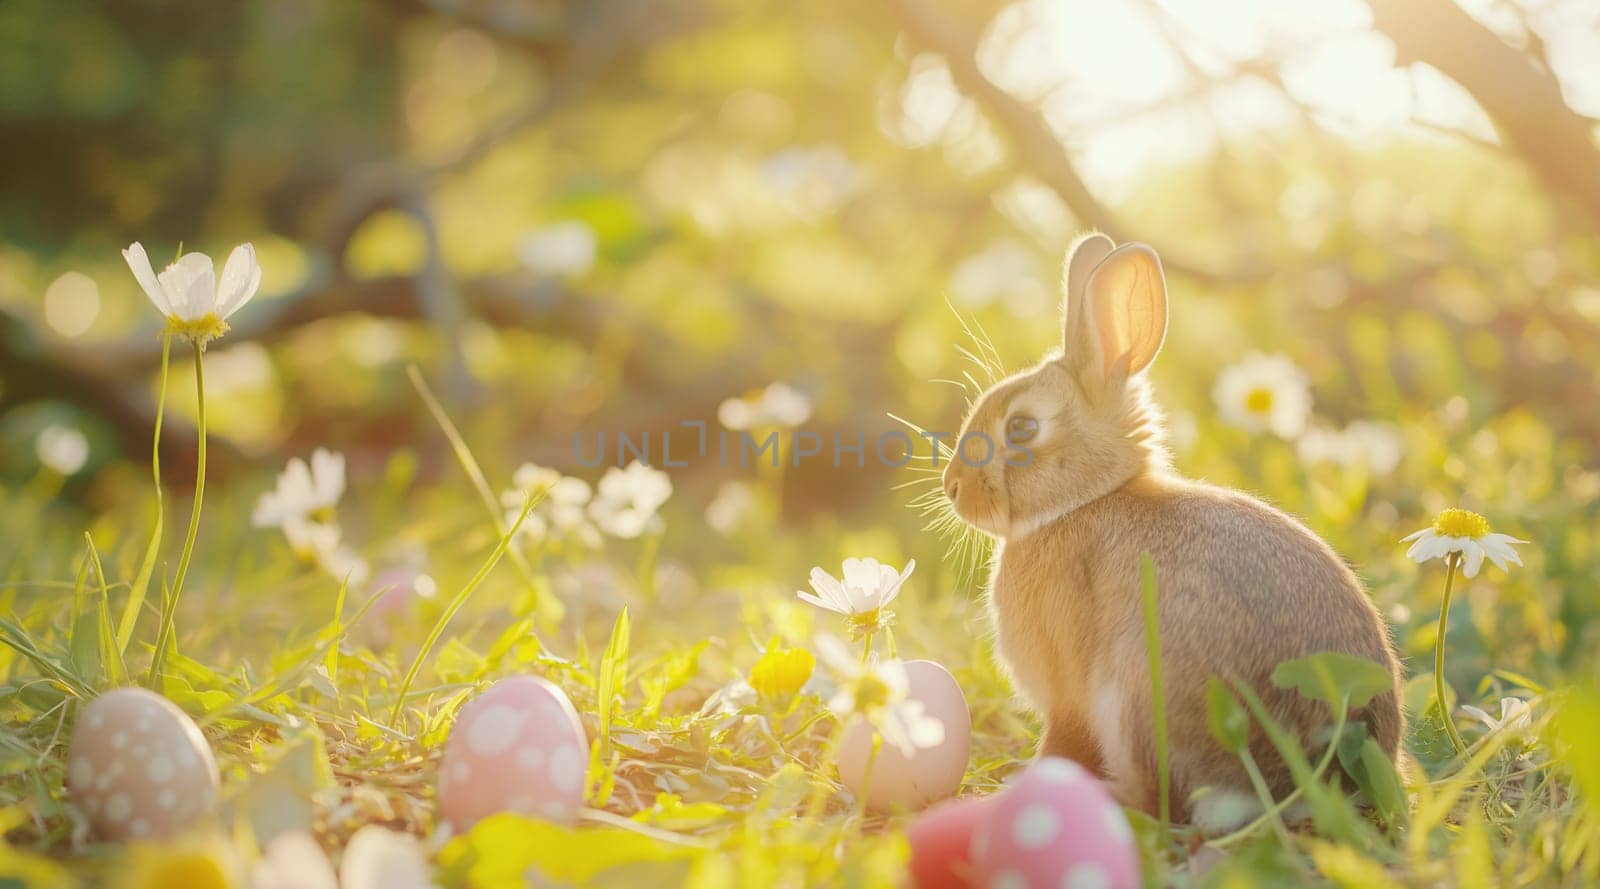 A serene rabbit amidst daisies and Easter eggs in a sunlit spring meadow by kizuneko